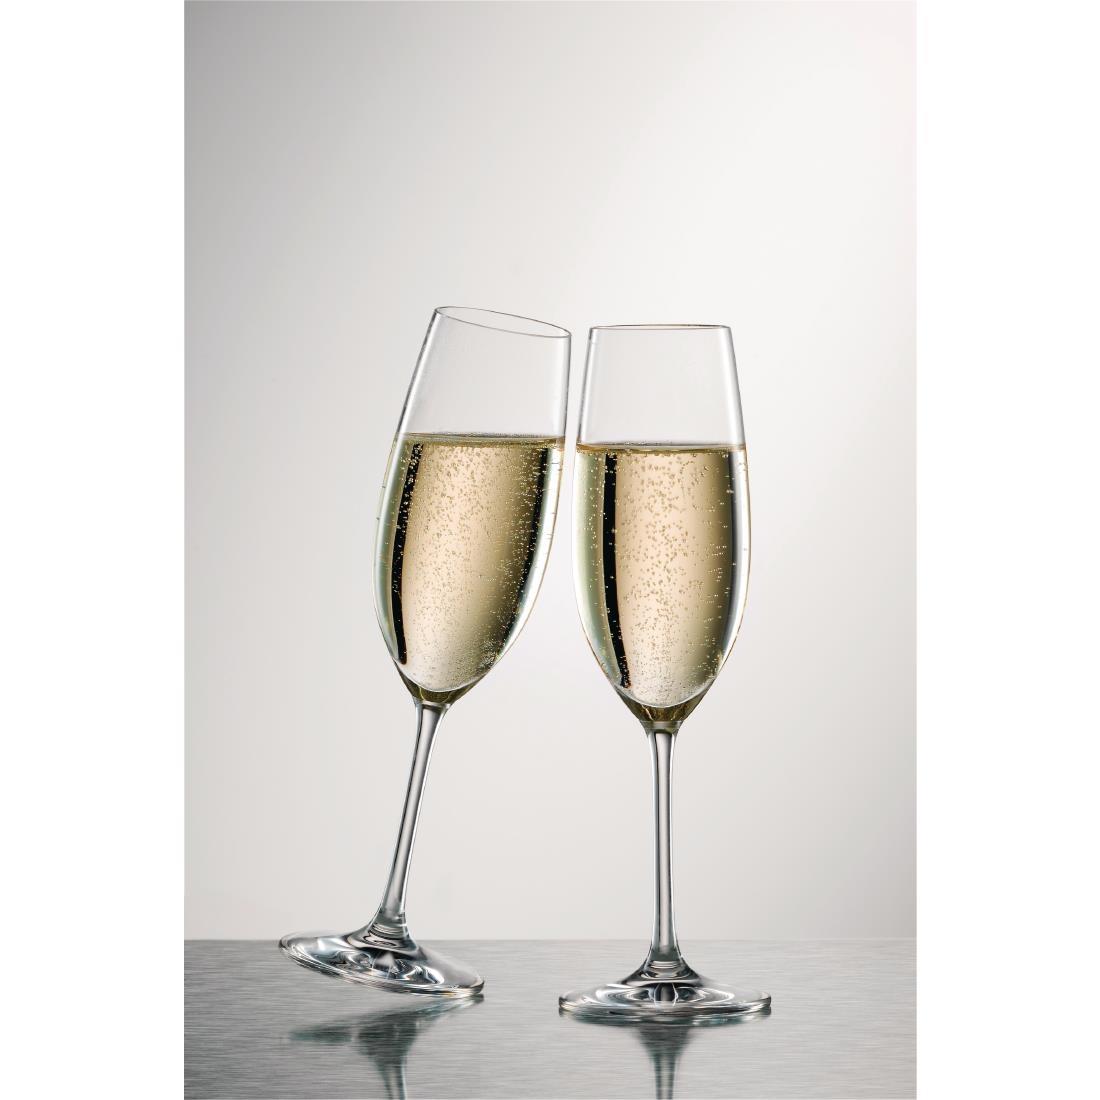 Schott Zwiesel Ivento Champagne flute 230ml (Pack of 6) - GL137  - 3